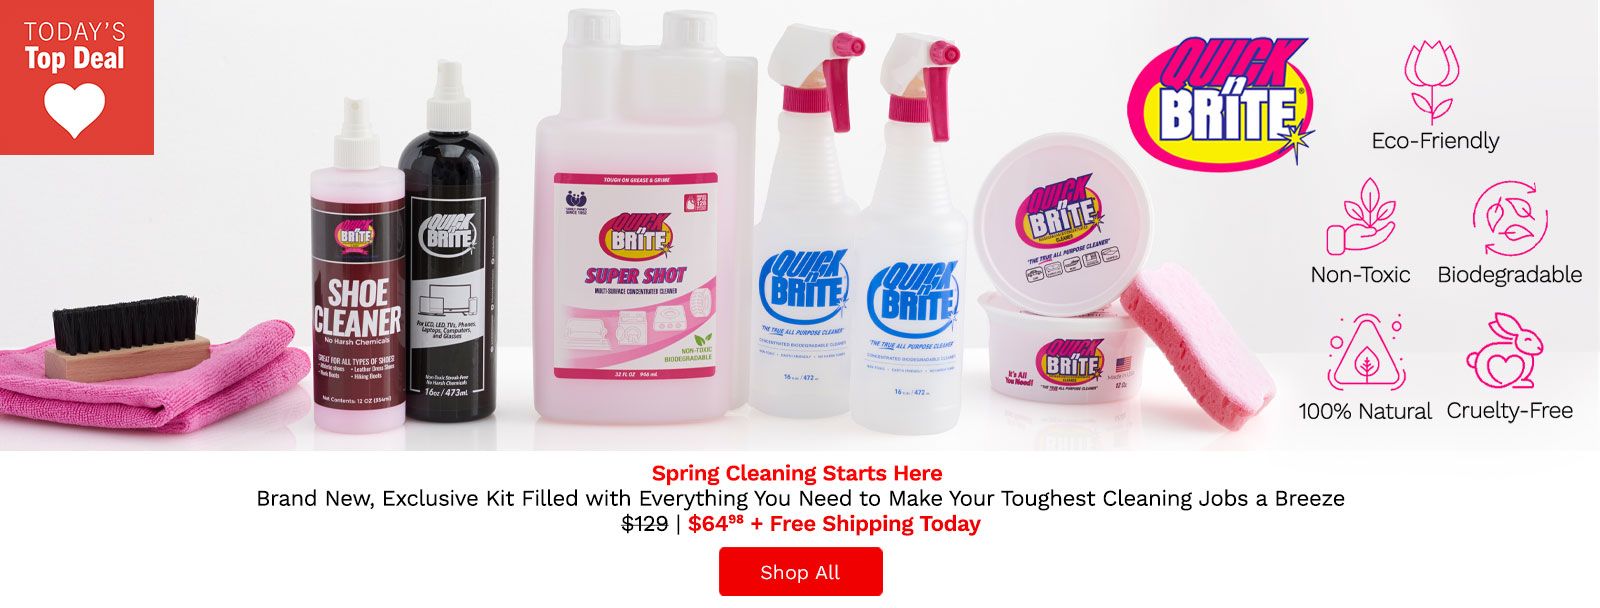 522-665 Spring Cleaning Starts Here Brand New, Exclusive Kit Filled with Everything You Need to Make Your Toughest Cleaning Jobs a Breeze